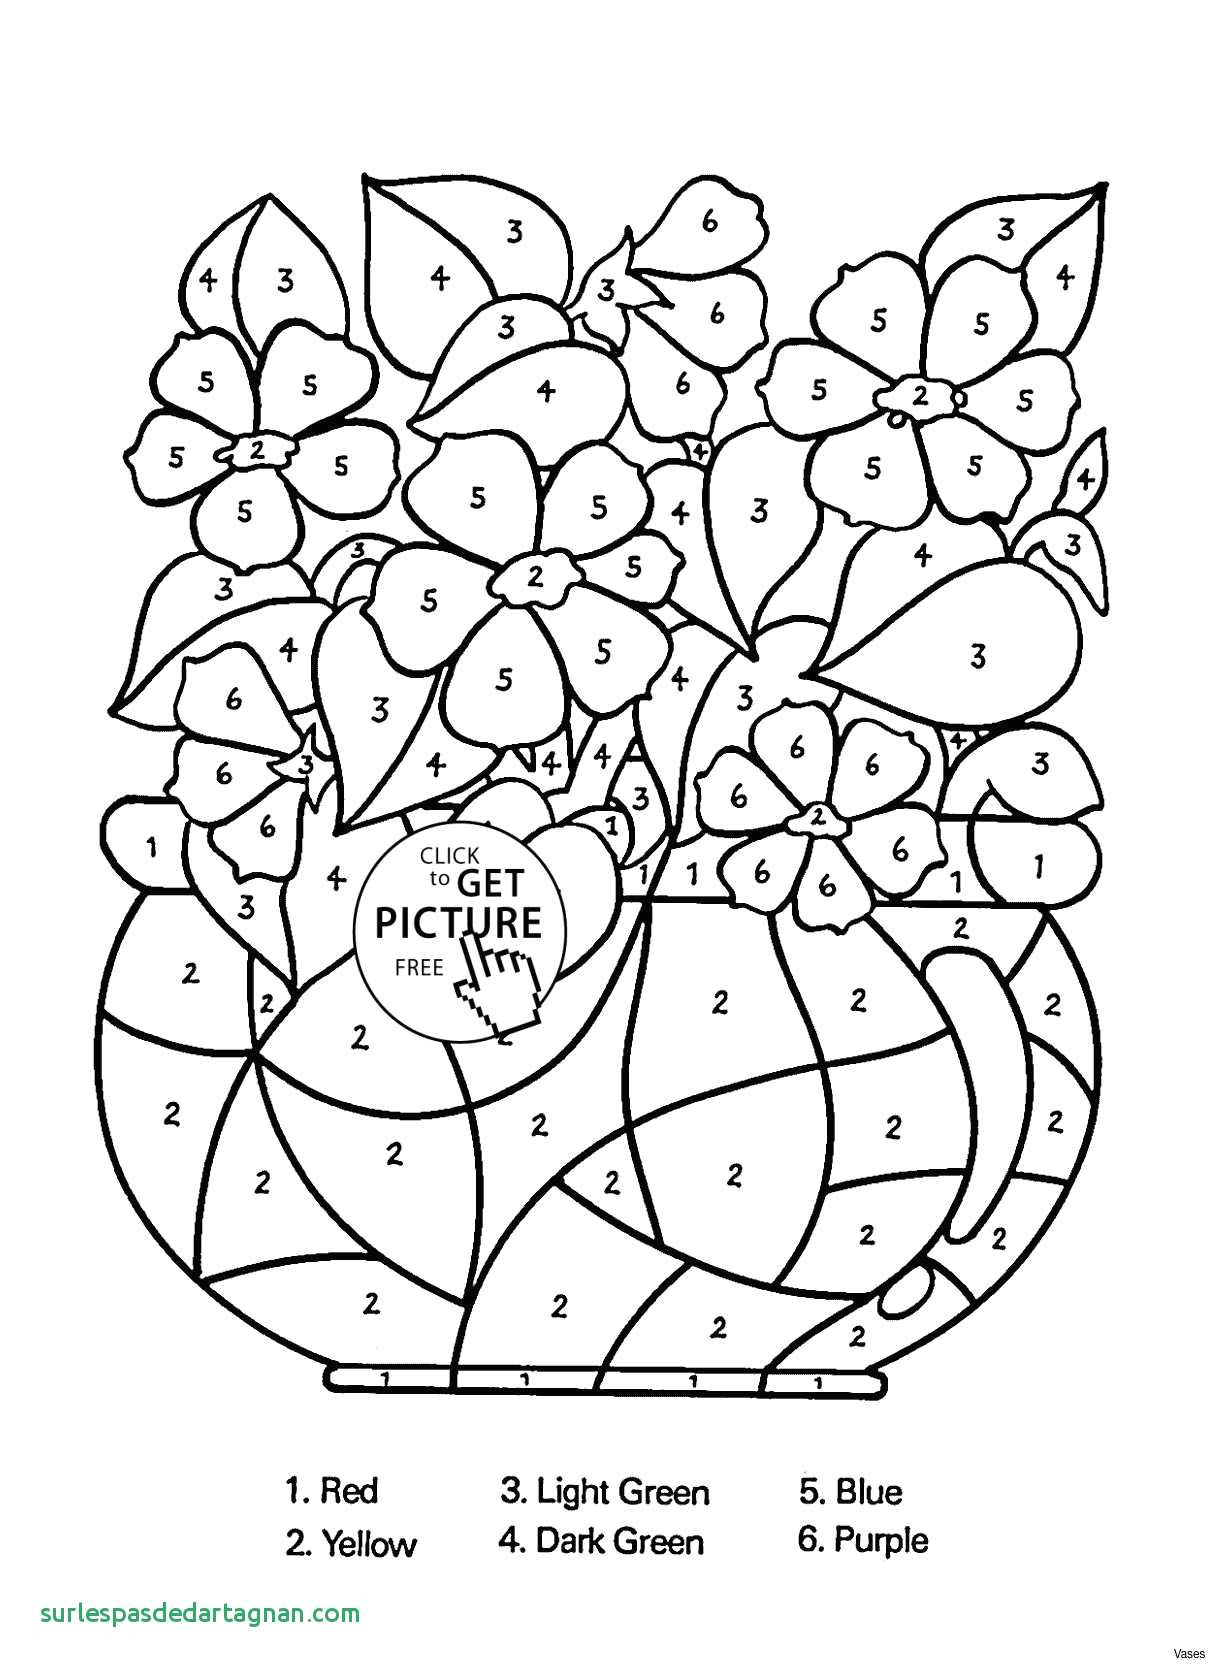 marker coloring page vases flower vase coloring page pages flowers in a top i 0d dot